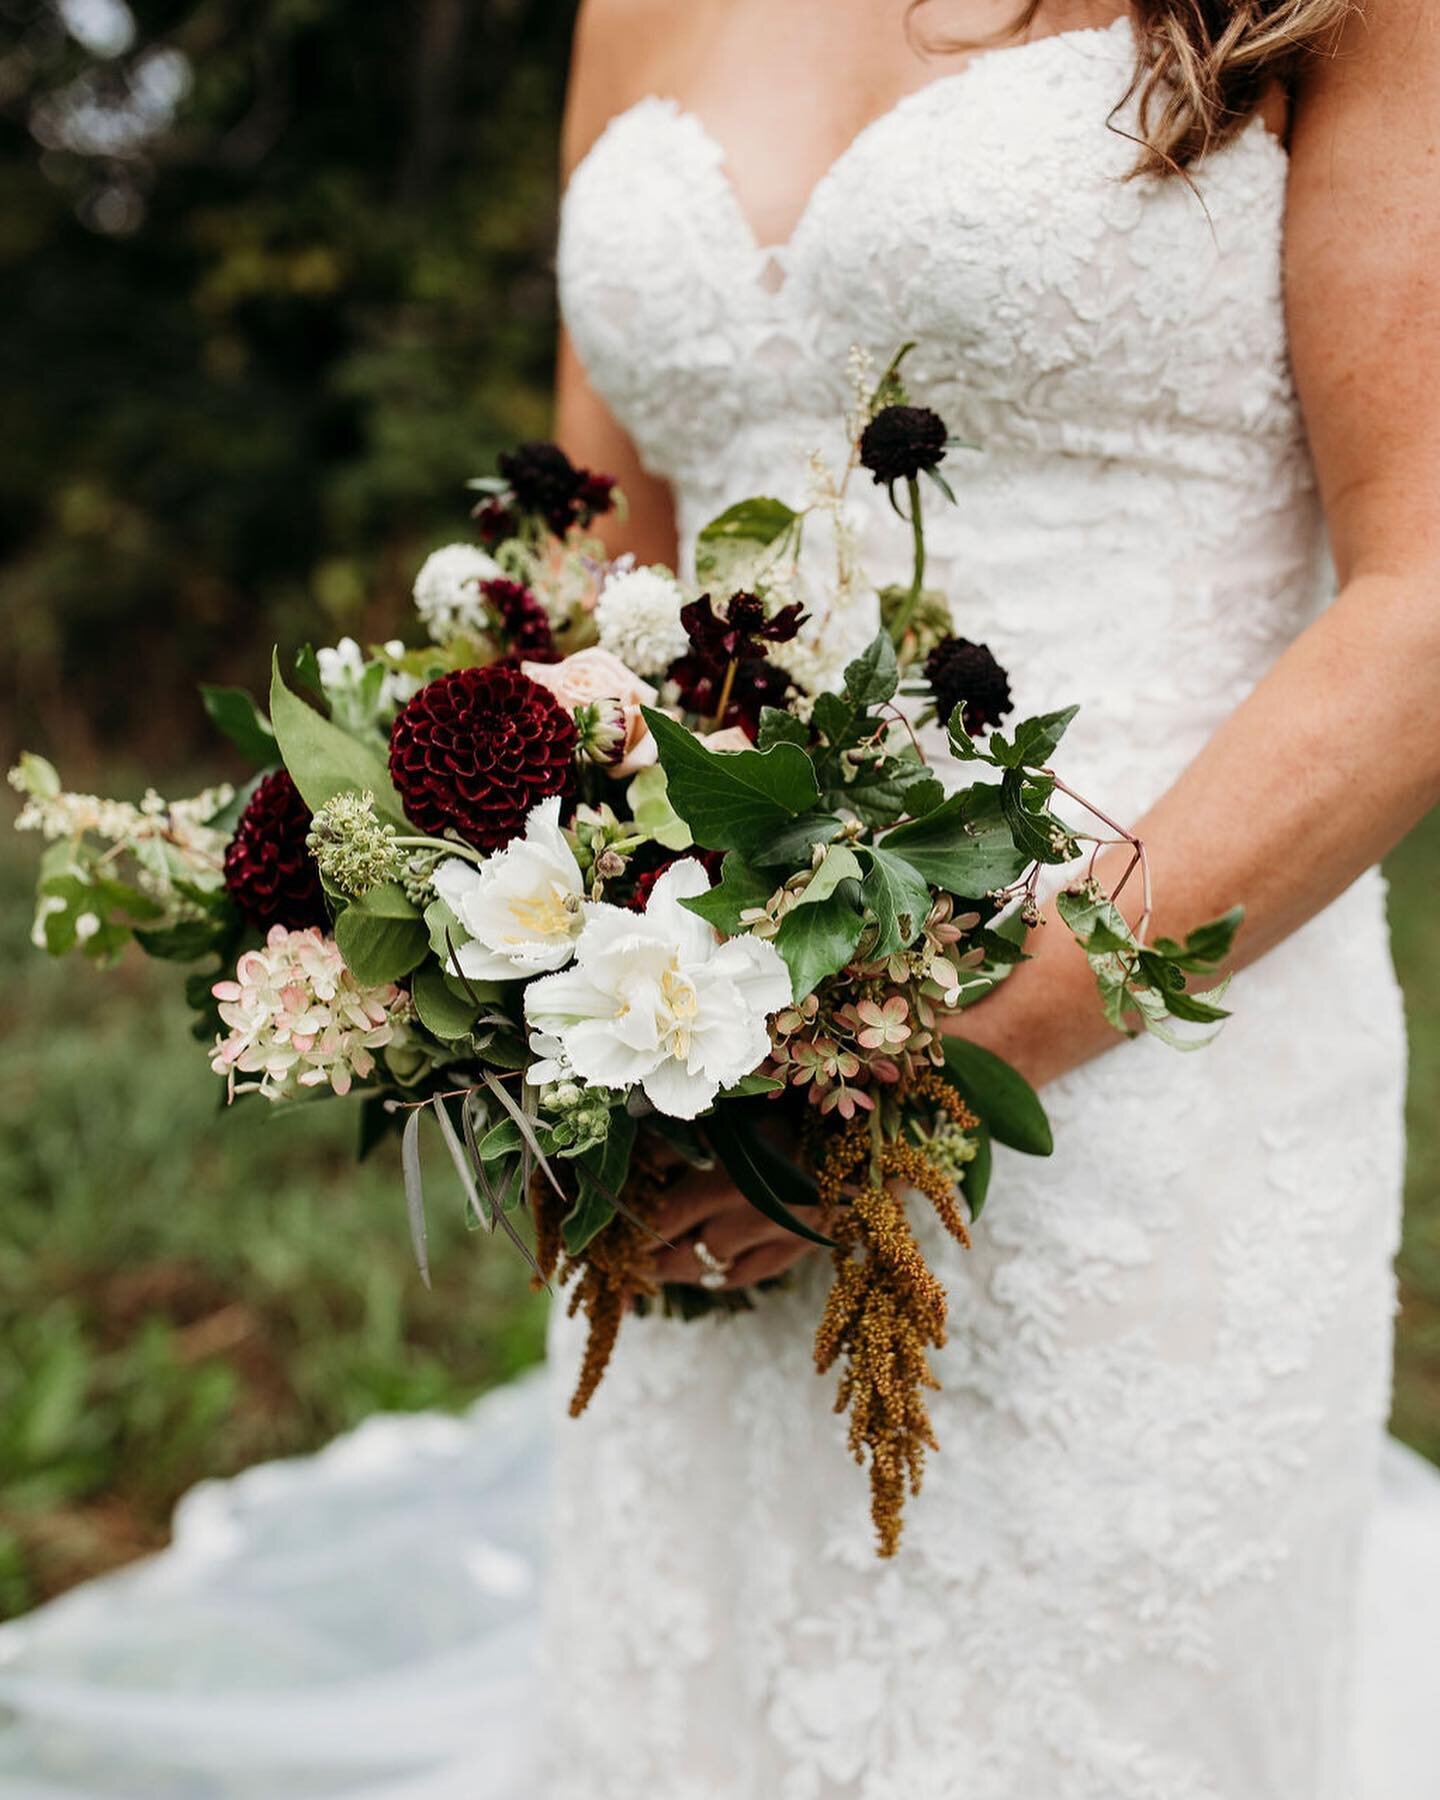 One of the many reasons I love fall weddings is because of their richer tones and so many textural floral elements. I mean, just look at Holly&rsquo;s bouquet. 

Planning and design @corneliajevents
Photography @kyrenemintyphotography
Florals @carrie